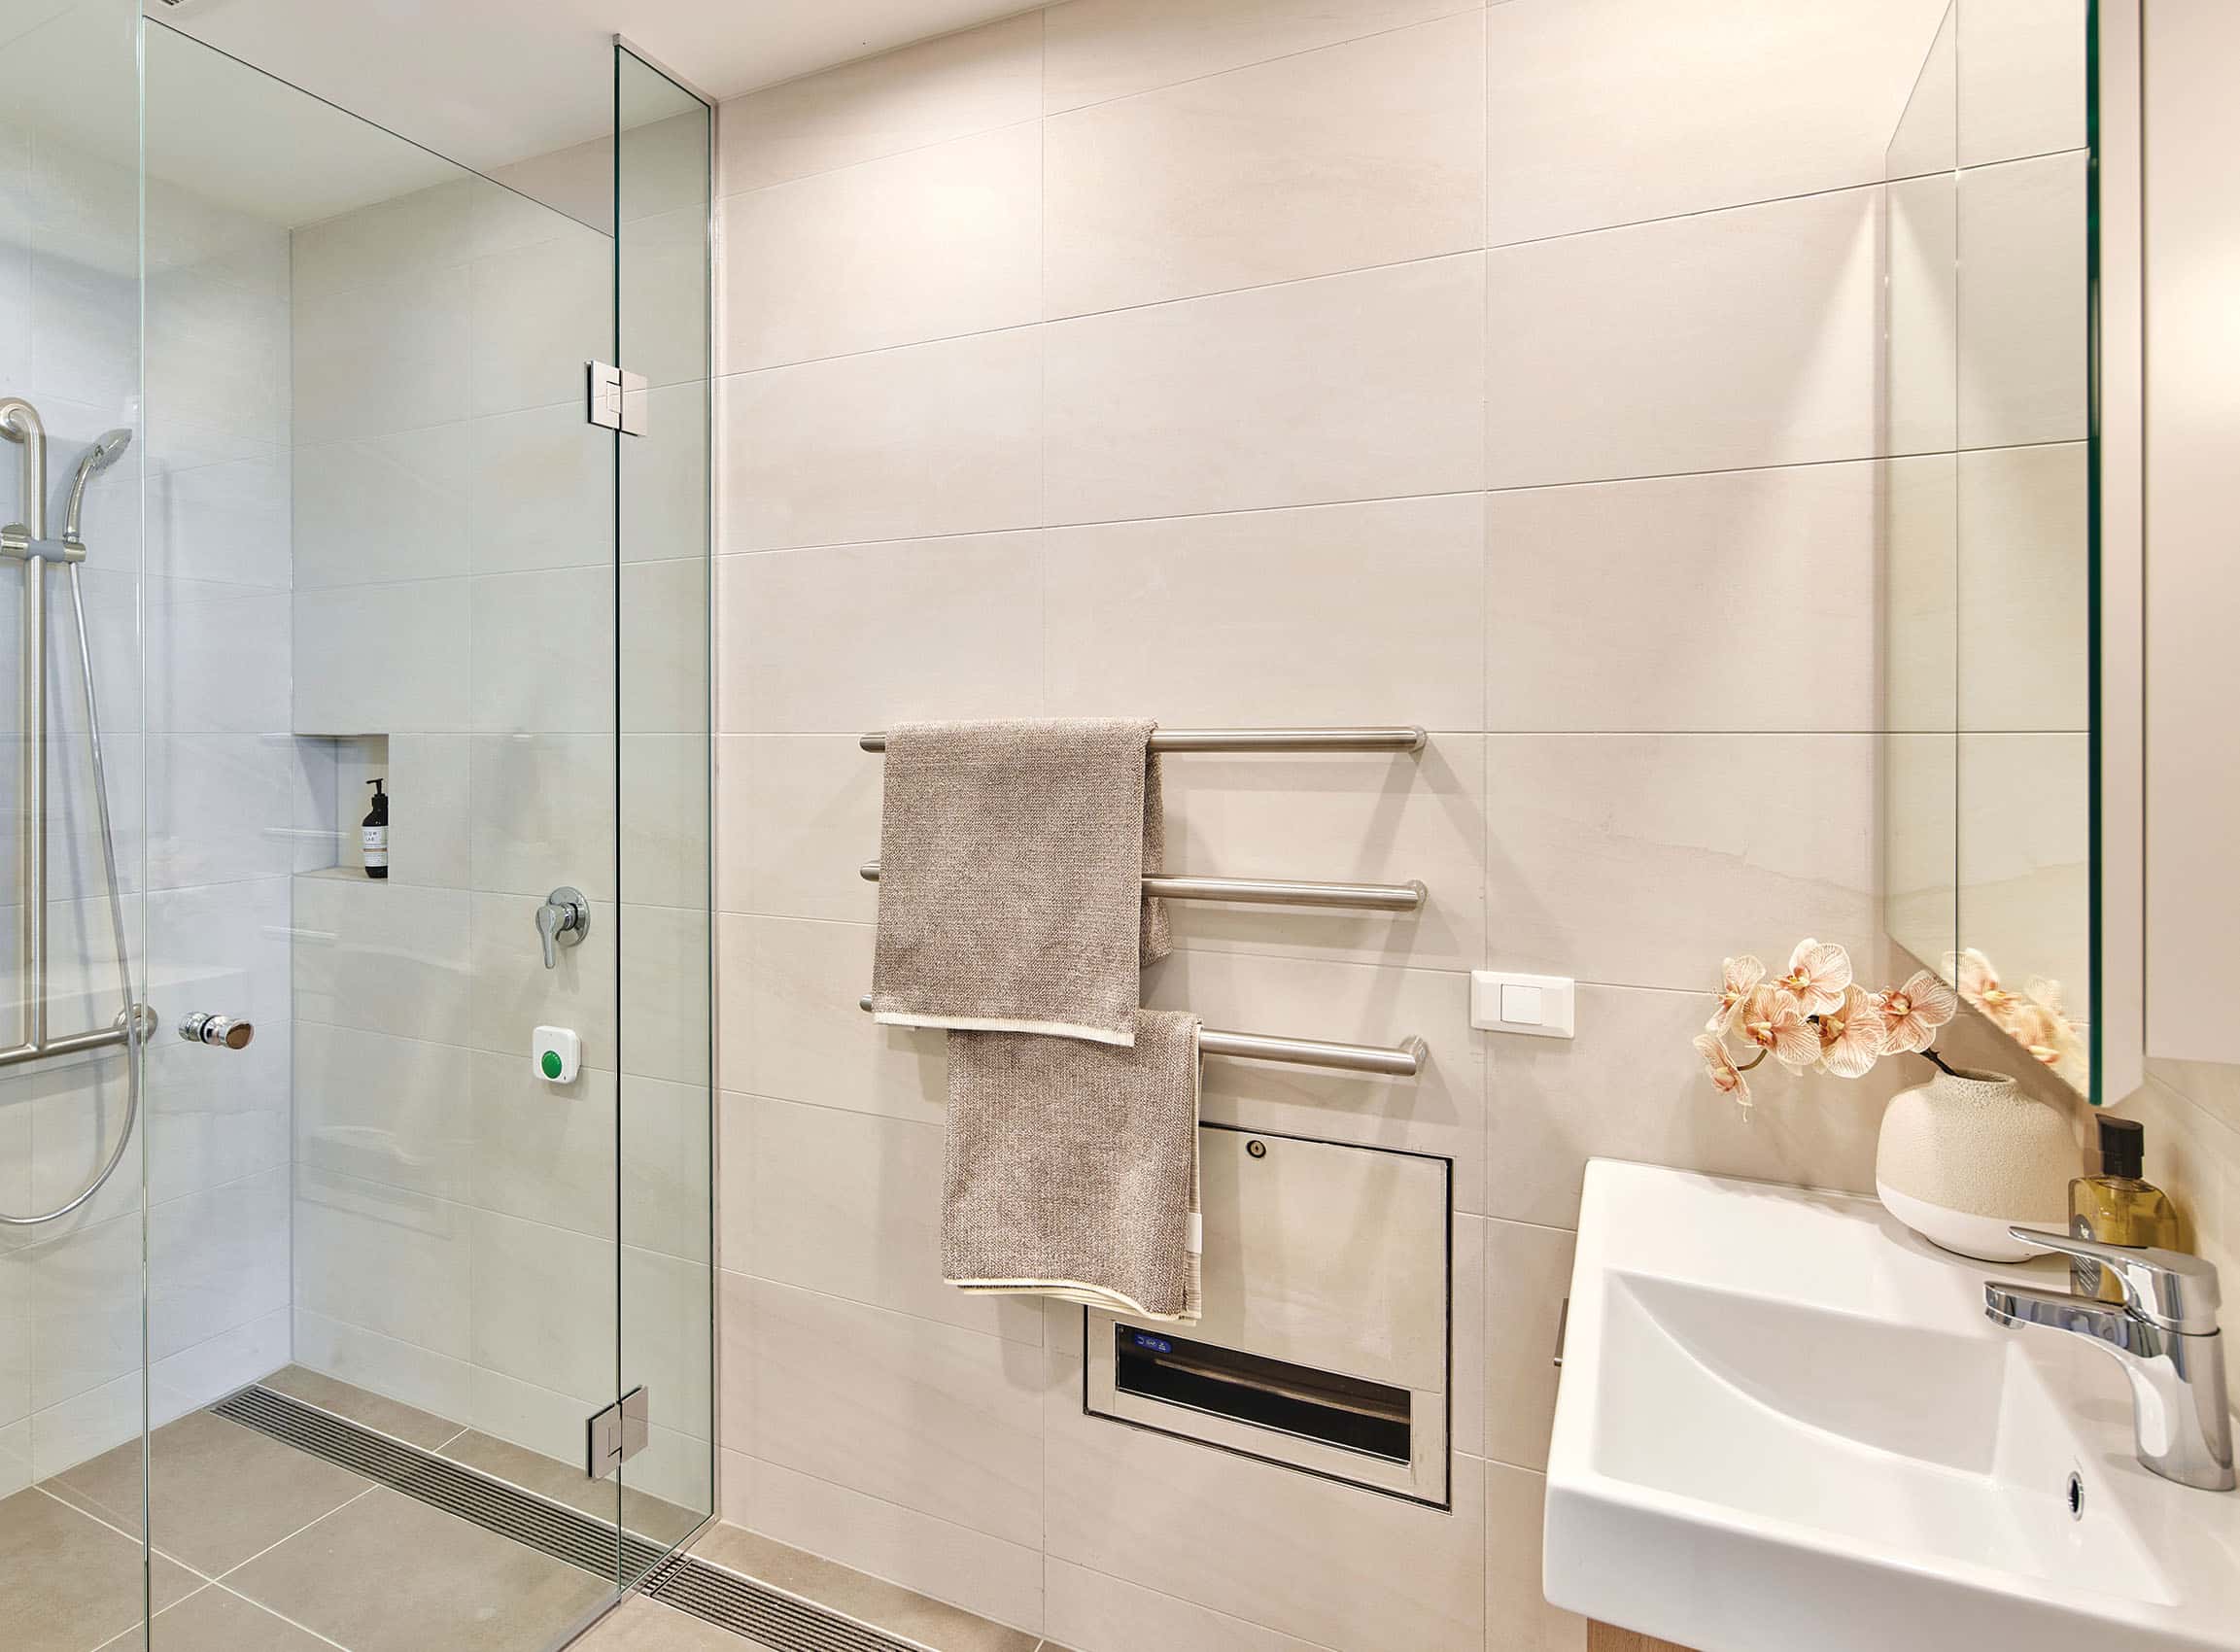 Apartments come with one or two bathrooms featuring elegant finishes